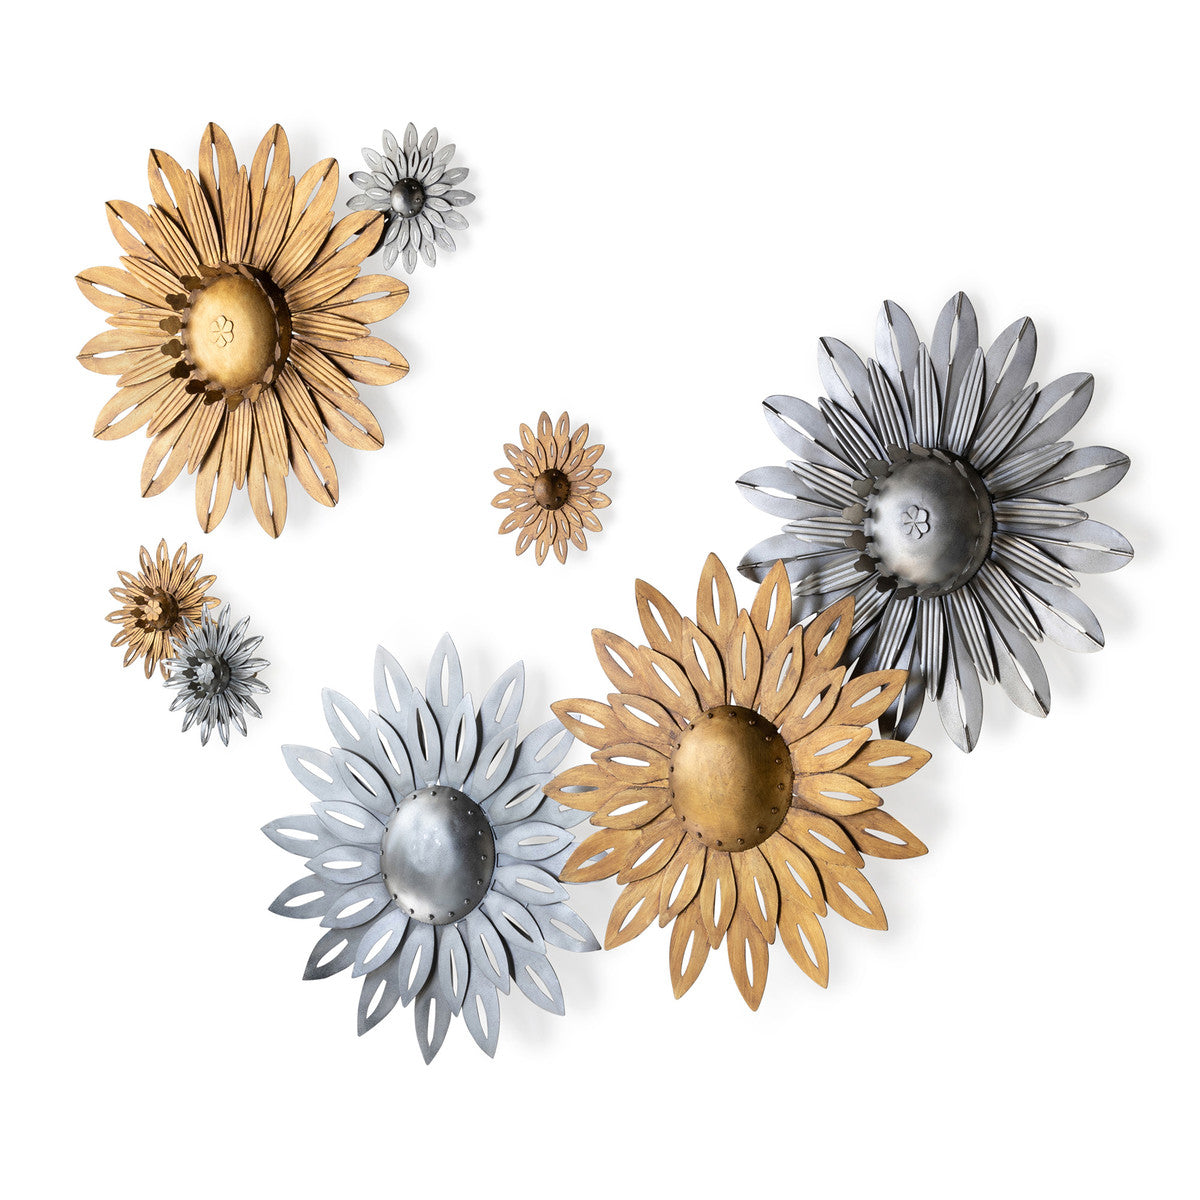 Aged Nickel Wall Sunflower, Small